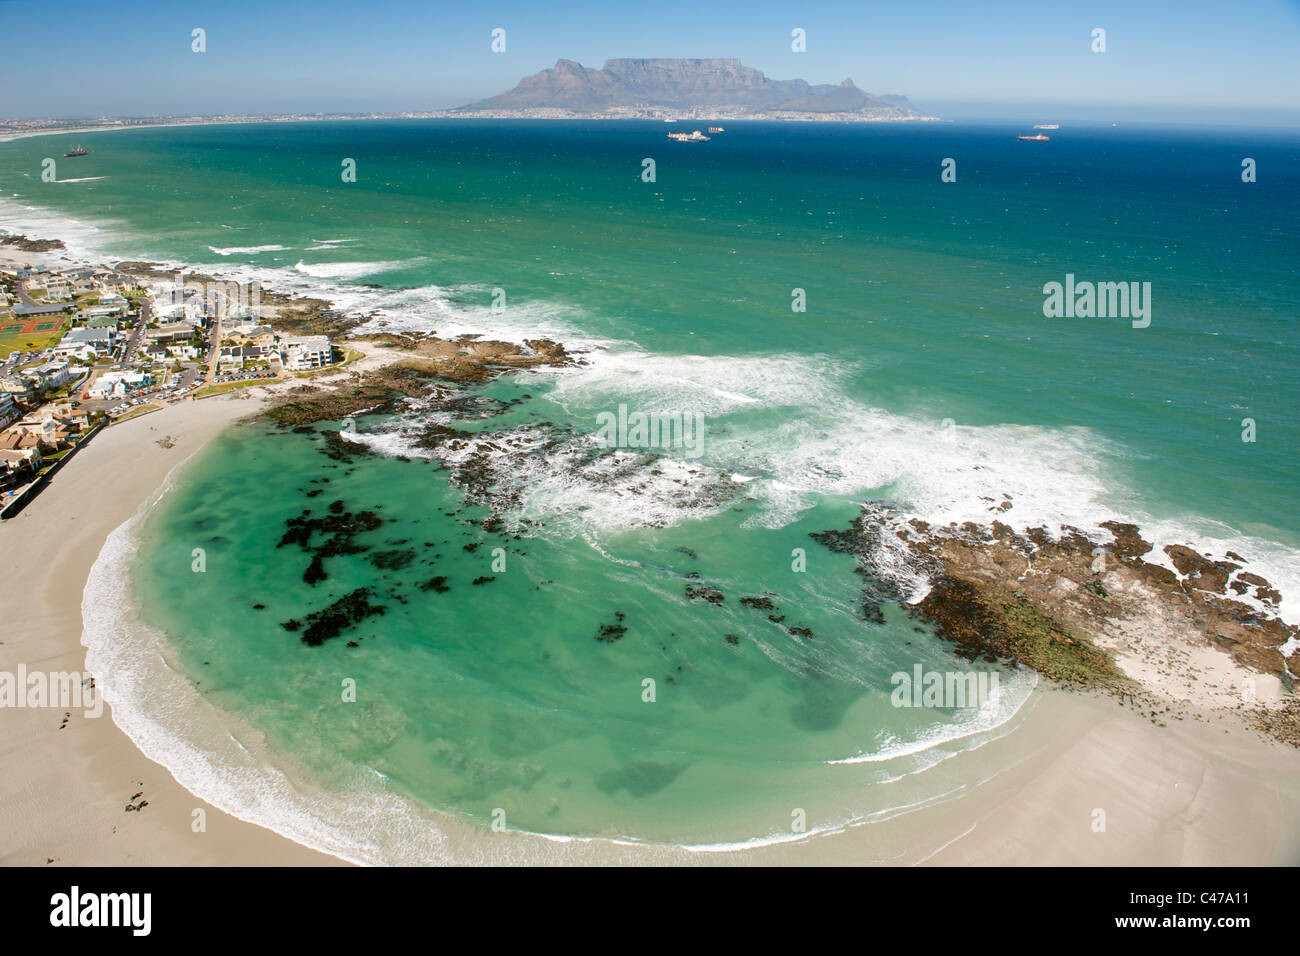 Aerial view of Big Bay on the west coast north of Cape Town in South Africa. Table Mountain is visible in the background. Stock Photo